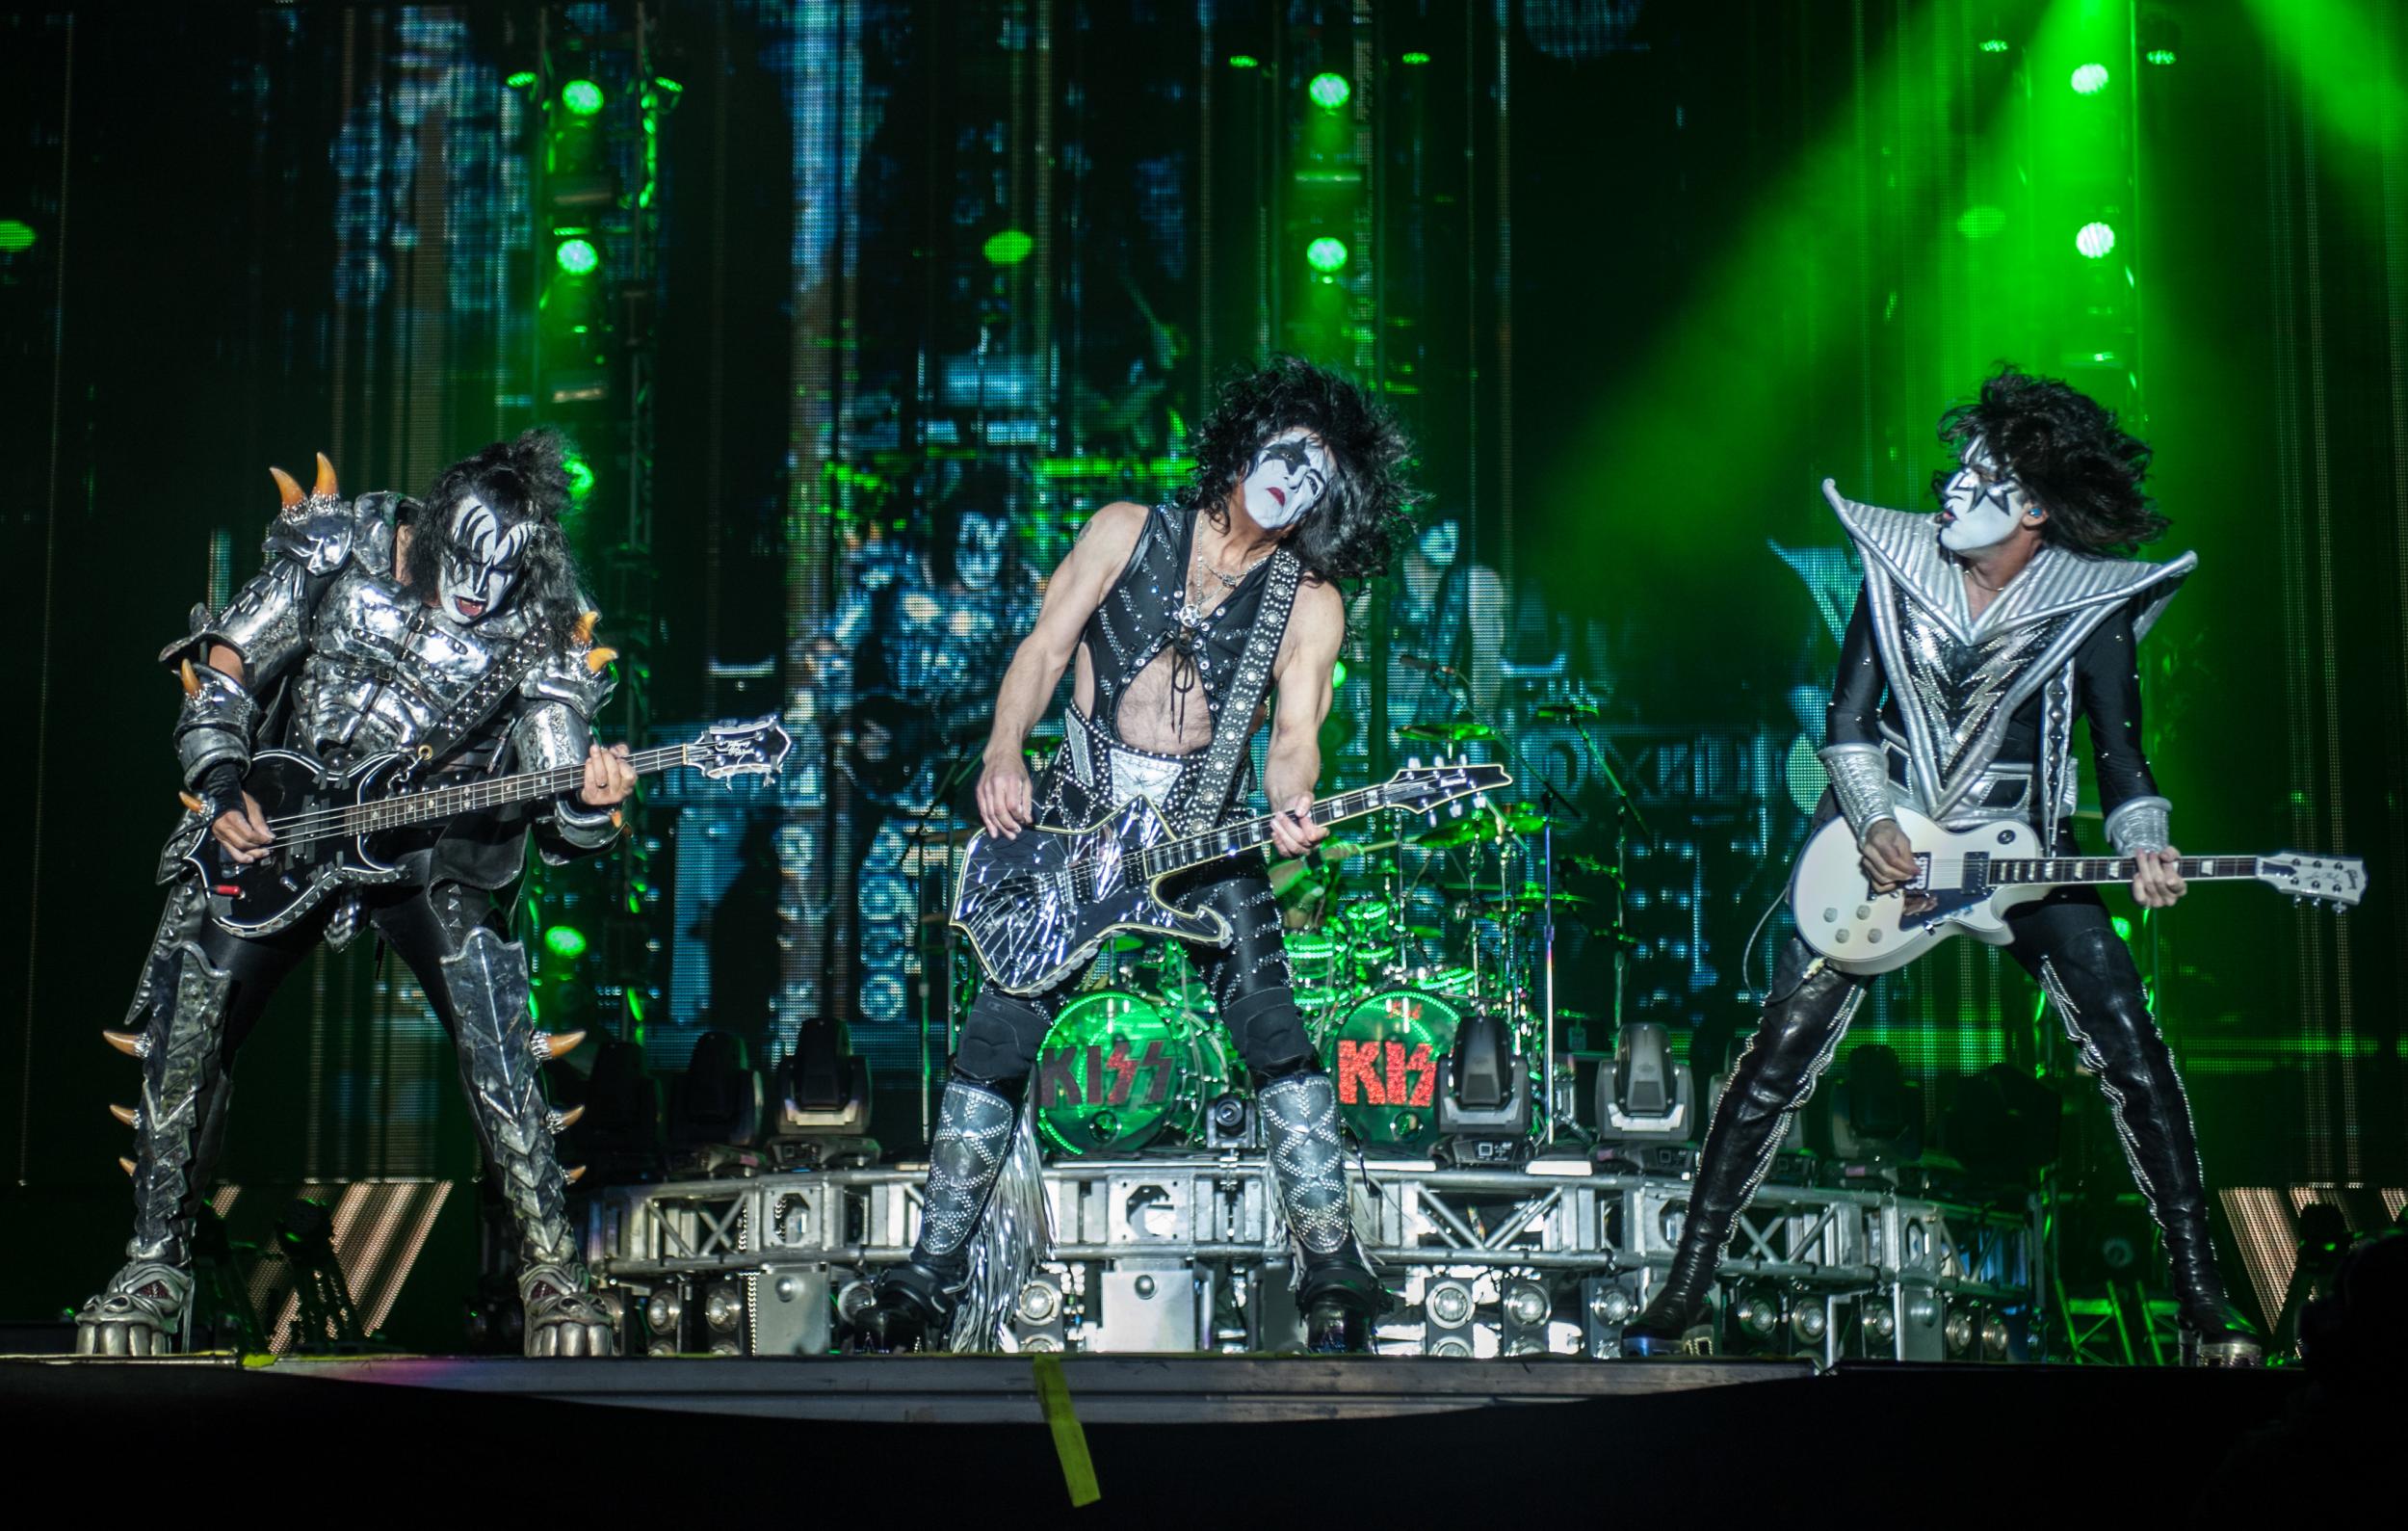 Crazy nights: Kiss, who were set to headline Download festival this year, will return in 2022